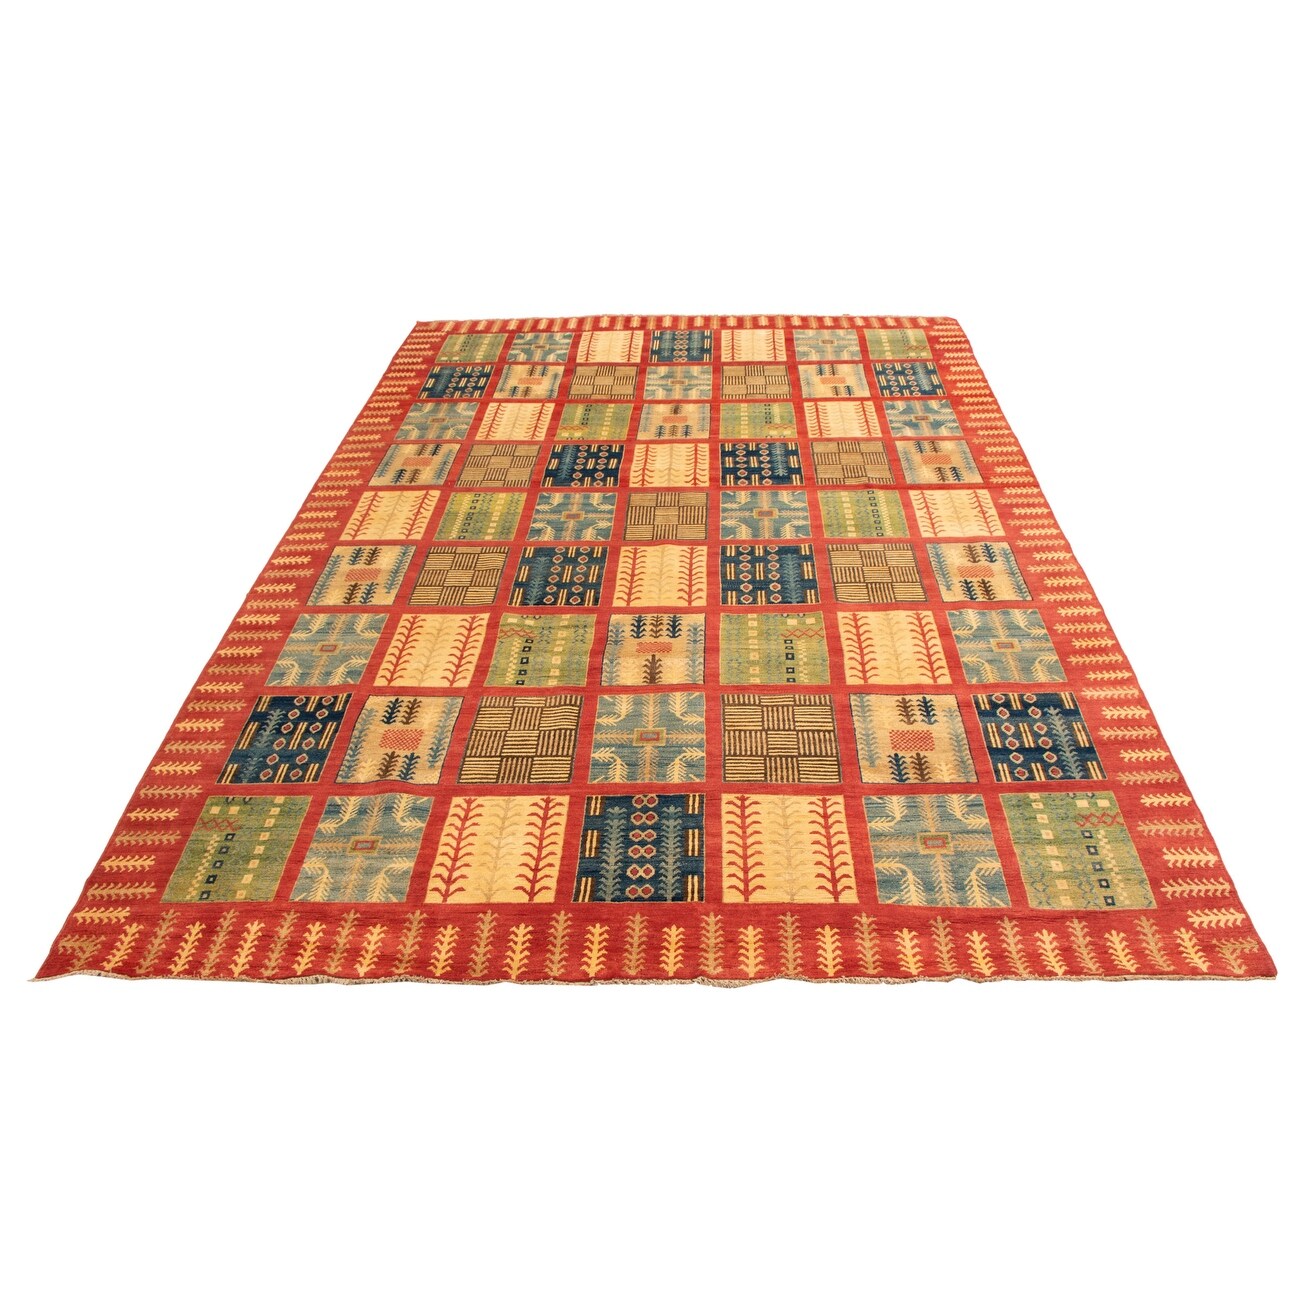 Bedroom Finest Ghazni Geometric Red Rug 9'8 x 13'8 Hand-Knotted Wool Rug eCarpet Gallery Large Area Rug for Living Room 363419